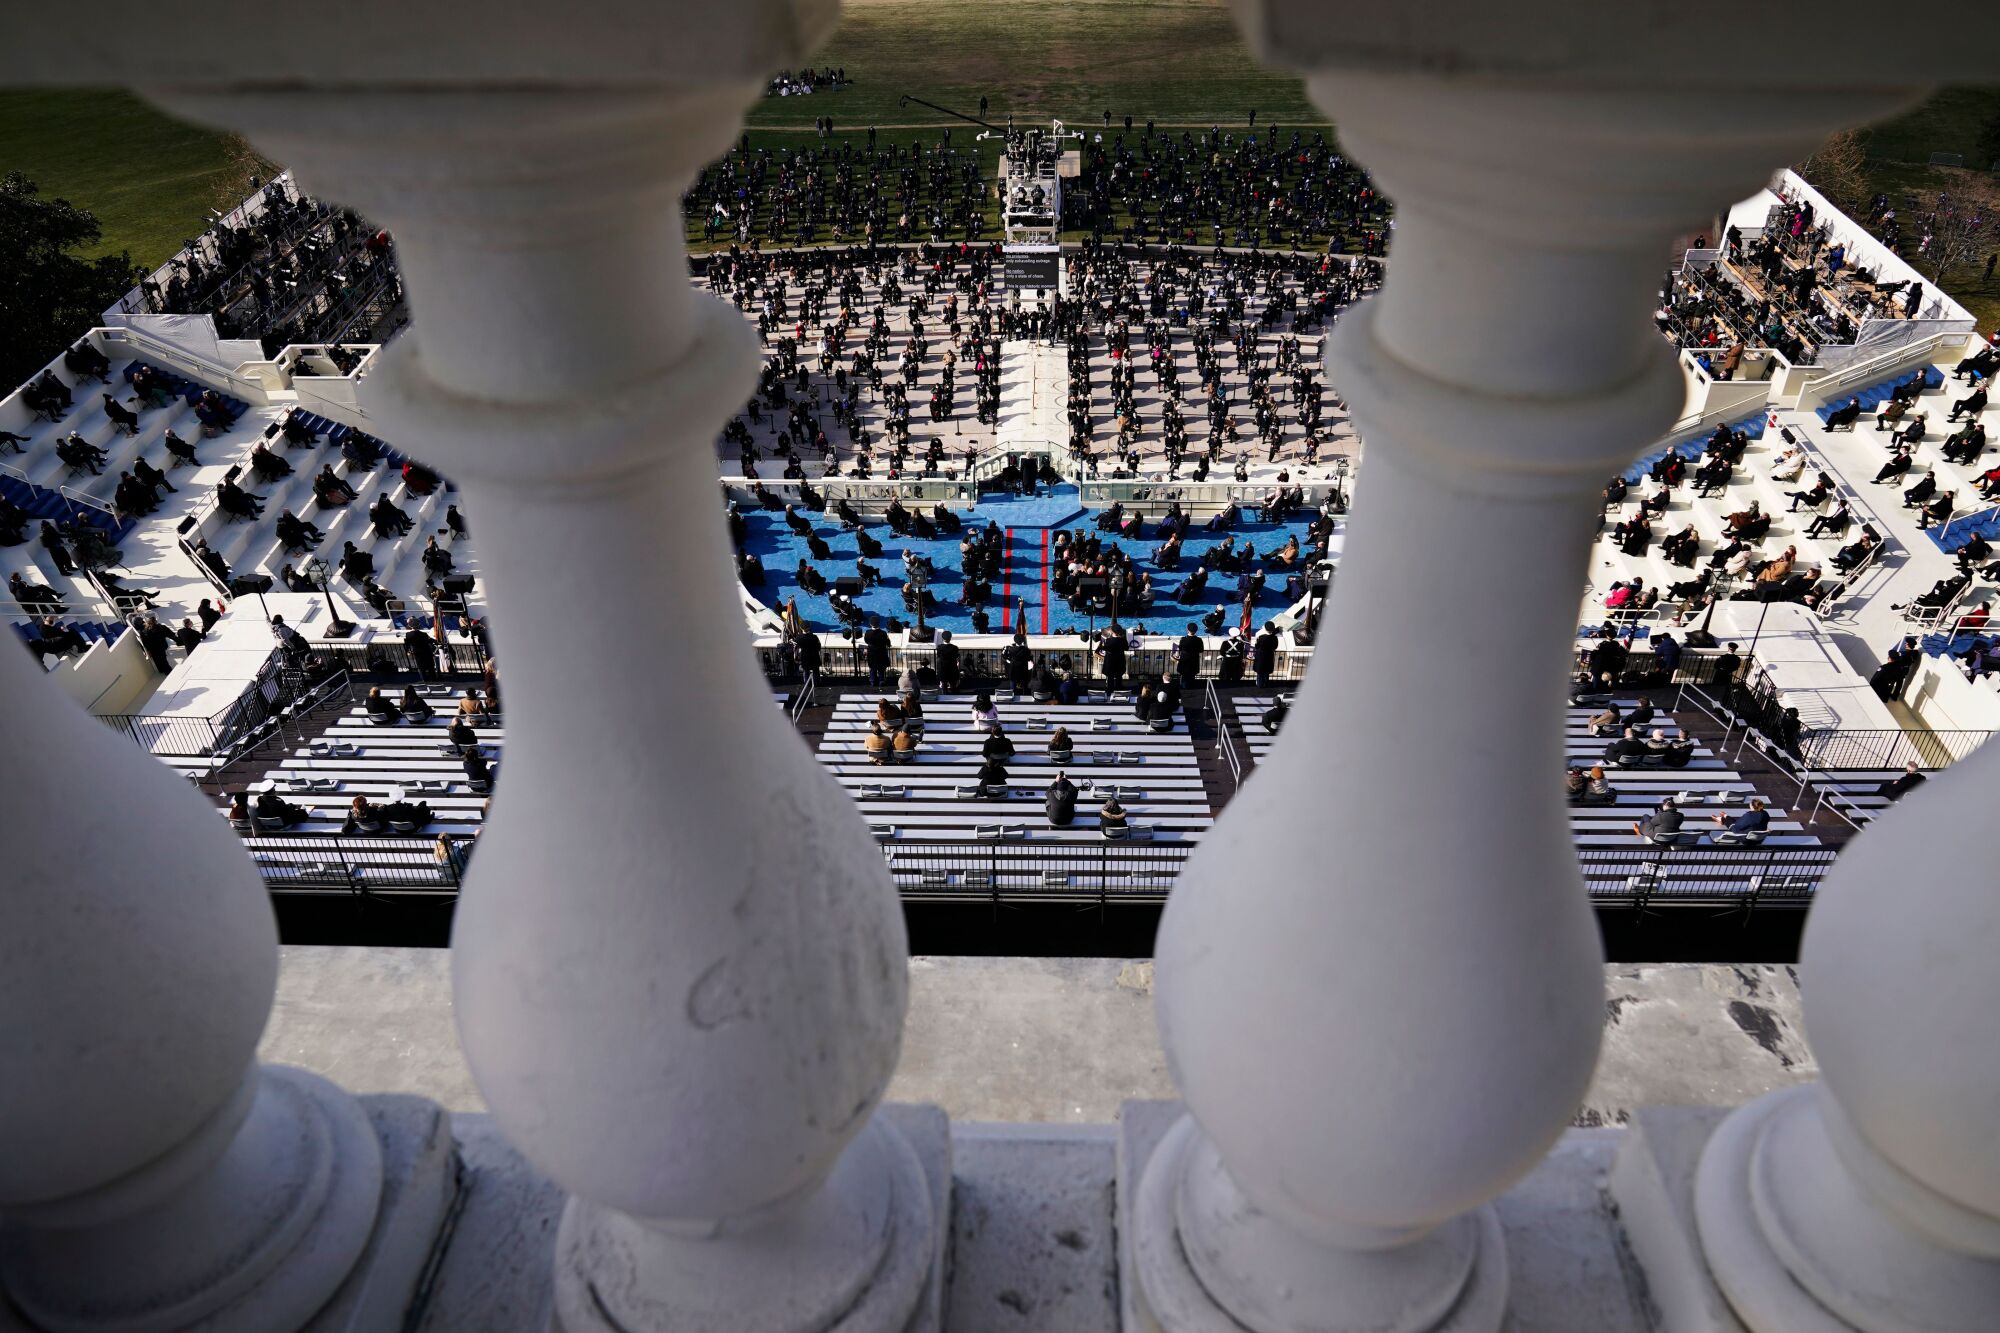 Guests and spectators attend the 59th presidential inauguration at the U.S. Capitol.